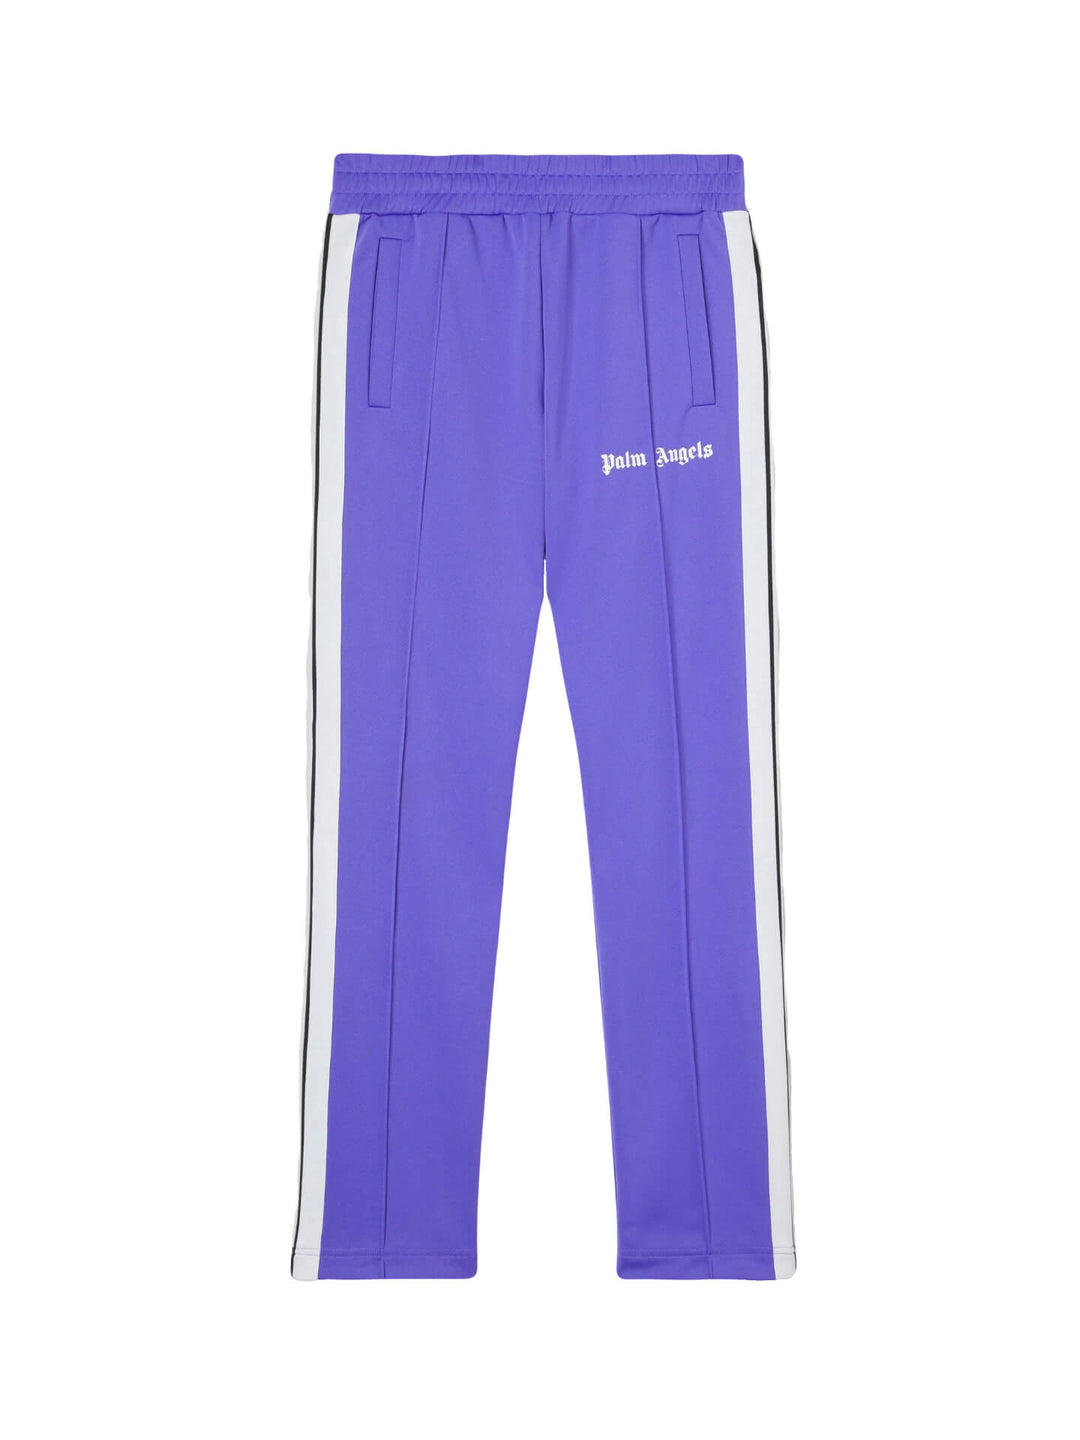 Palm Angels Tracksuit – SNW